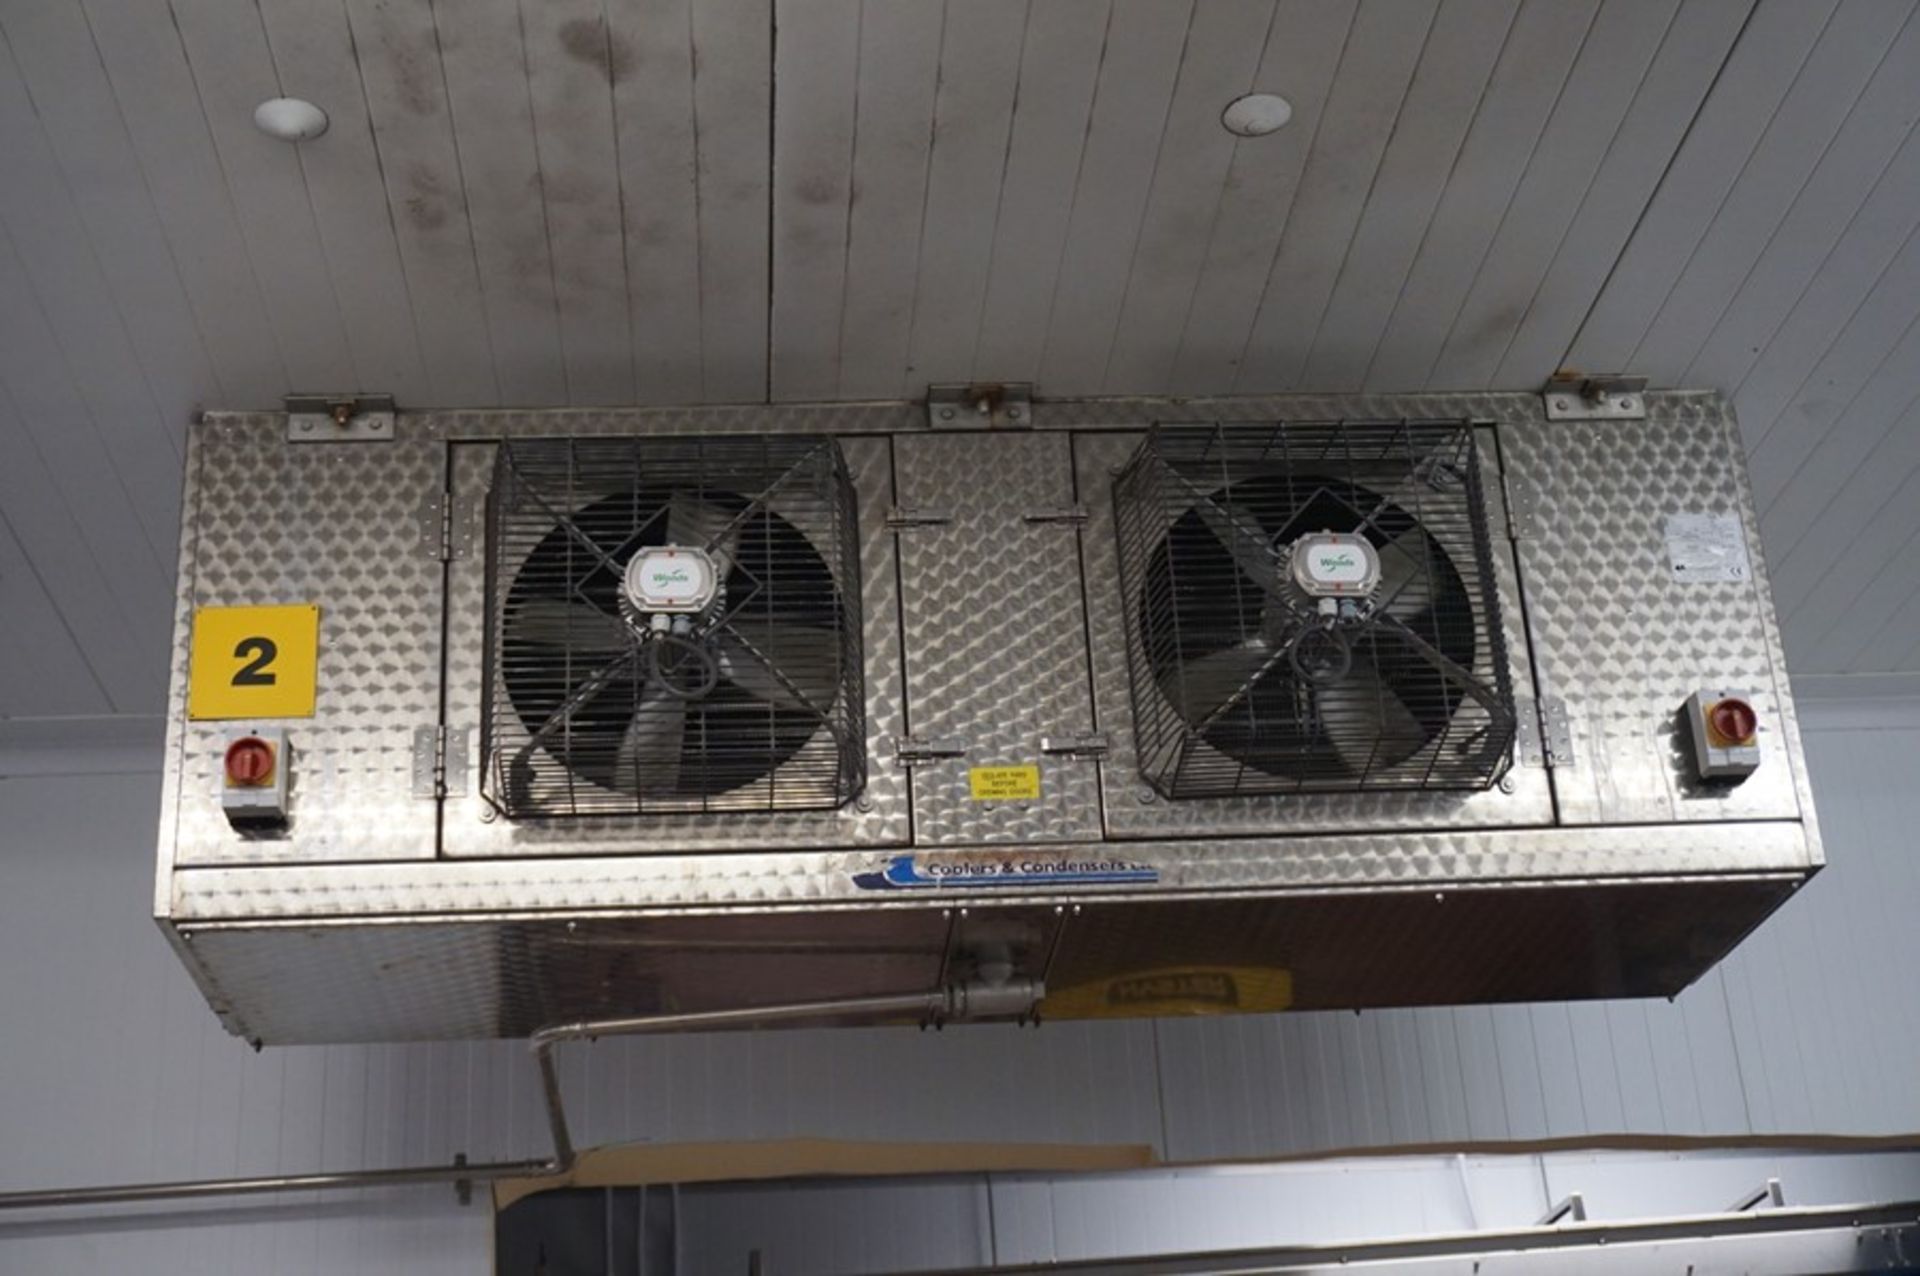 Coolers & Condensers, Model: CA12 84 CLN, stainless steel twin fan chiller unit, Serial No. SOP19361